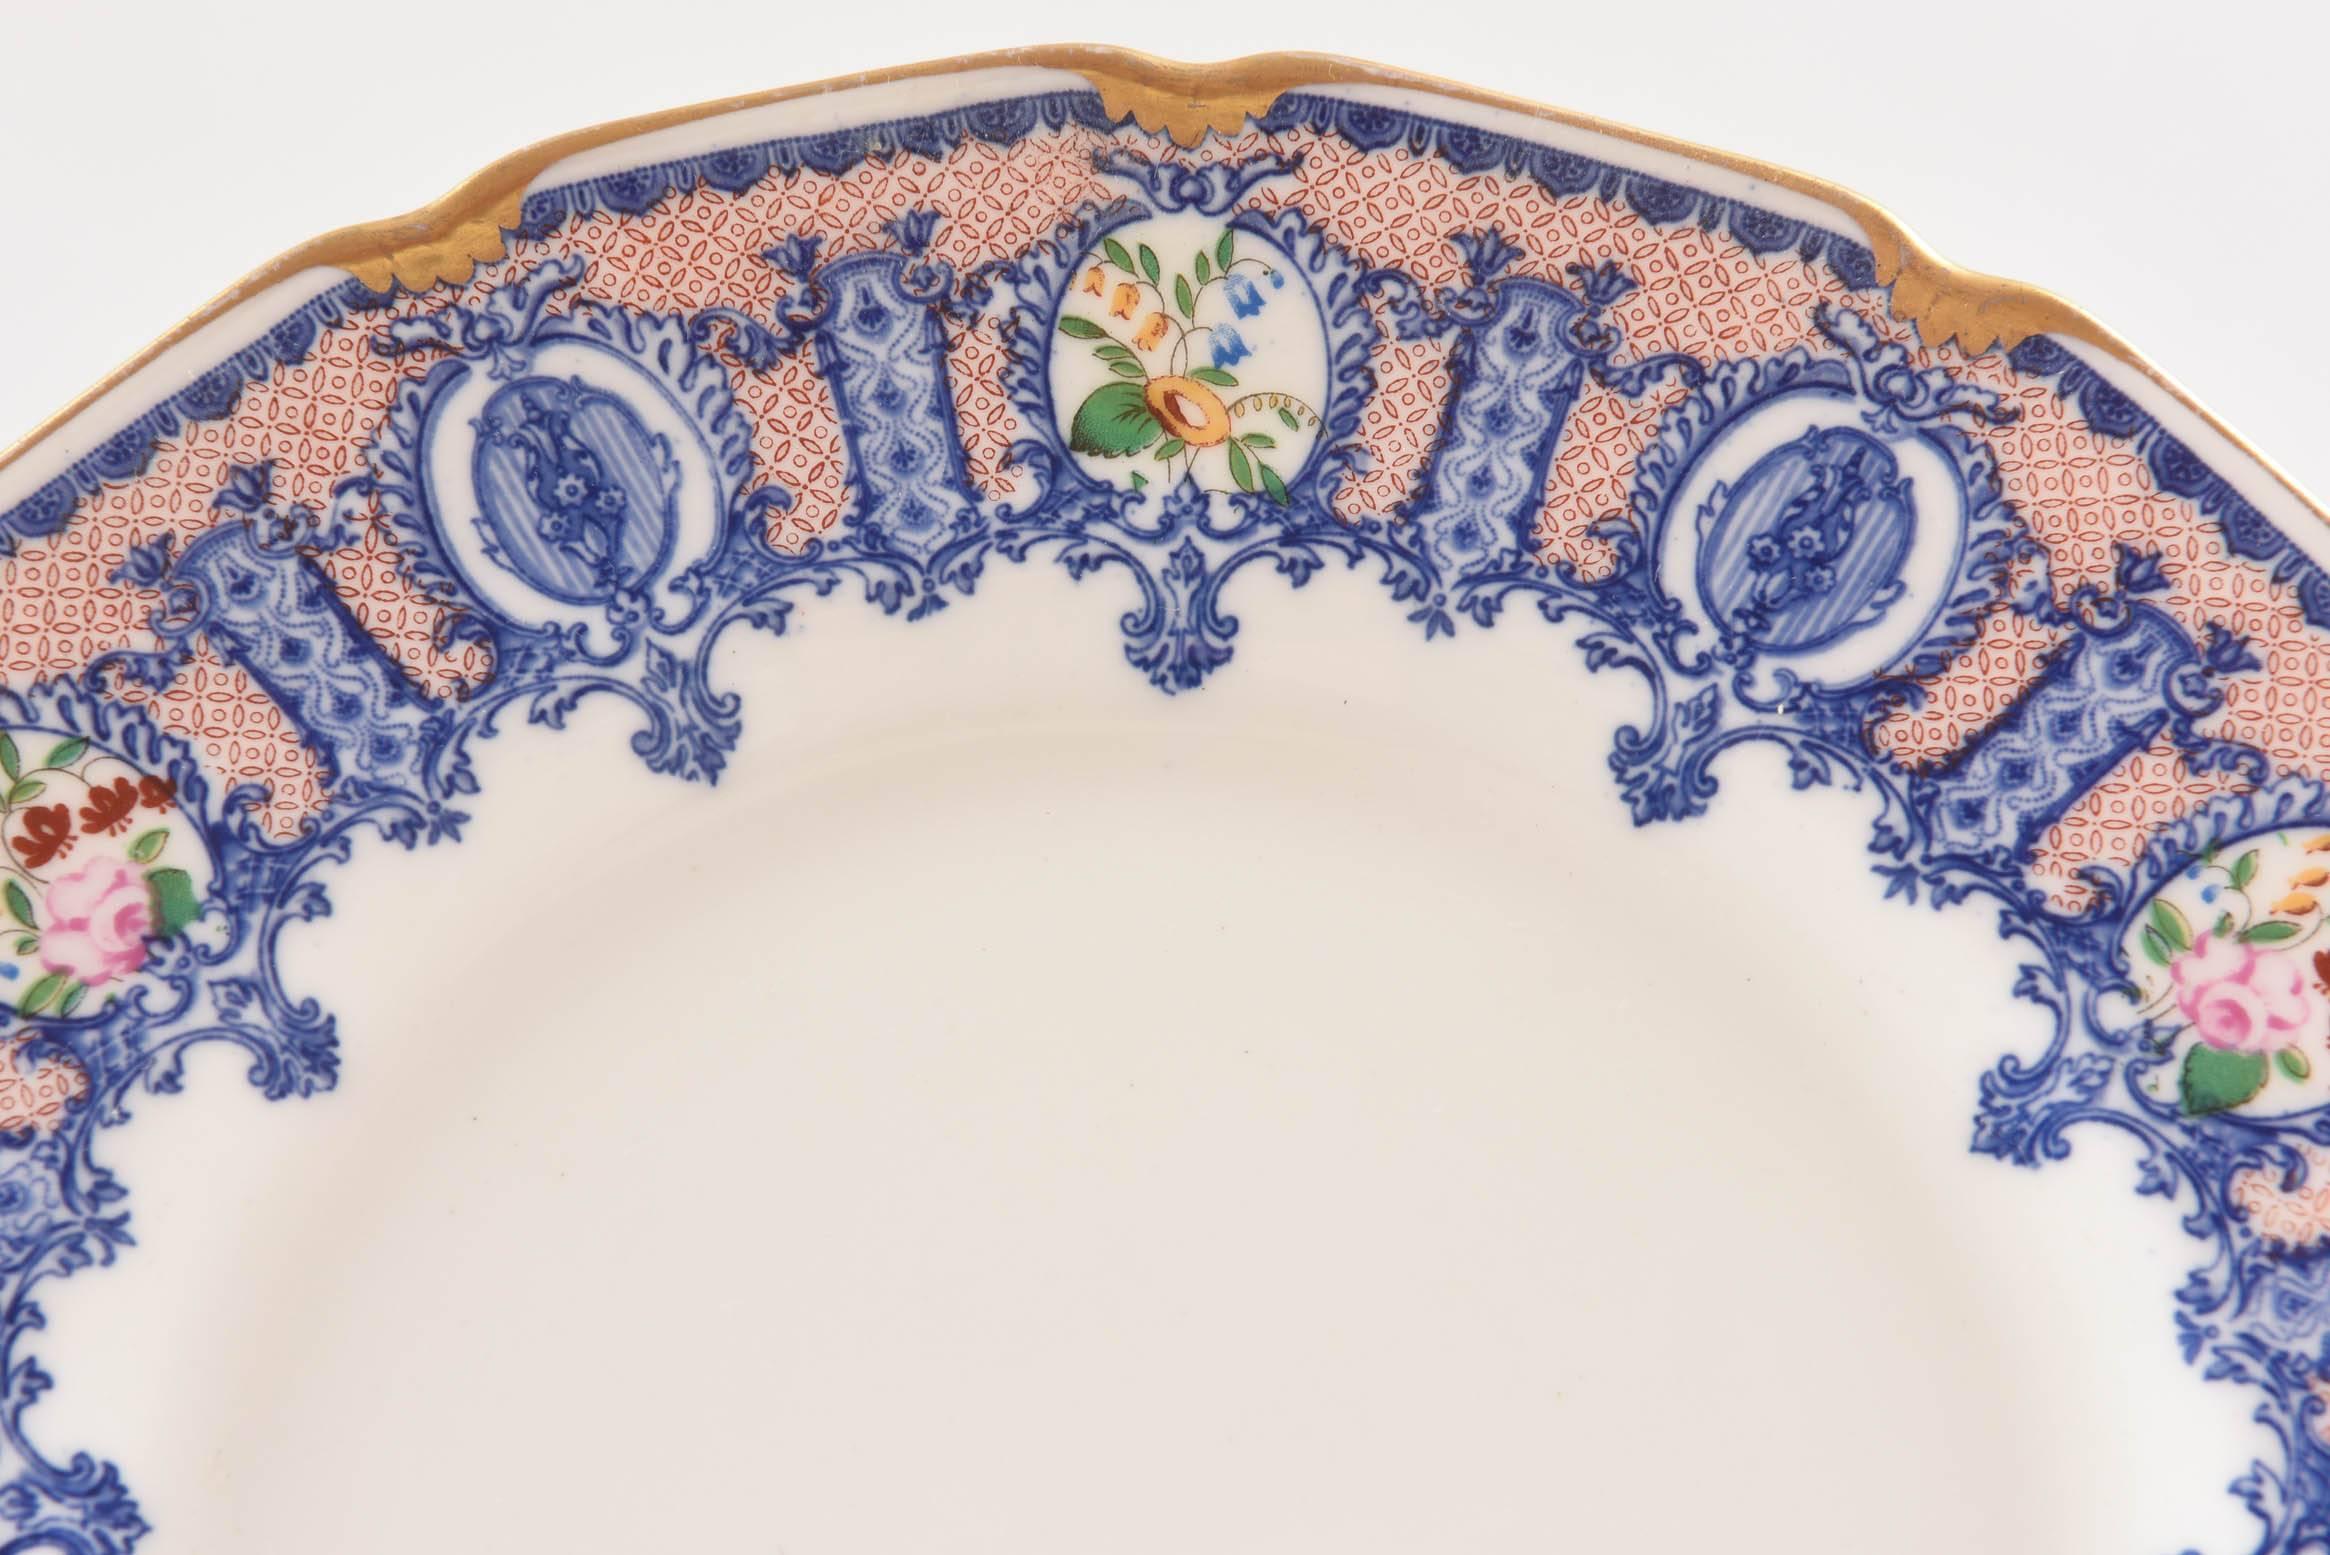 Early 20th Century 12 Antique Dessert Plates, Blue with Roses, Custom Ordered Marshall Fields